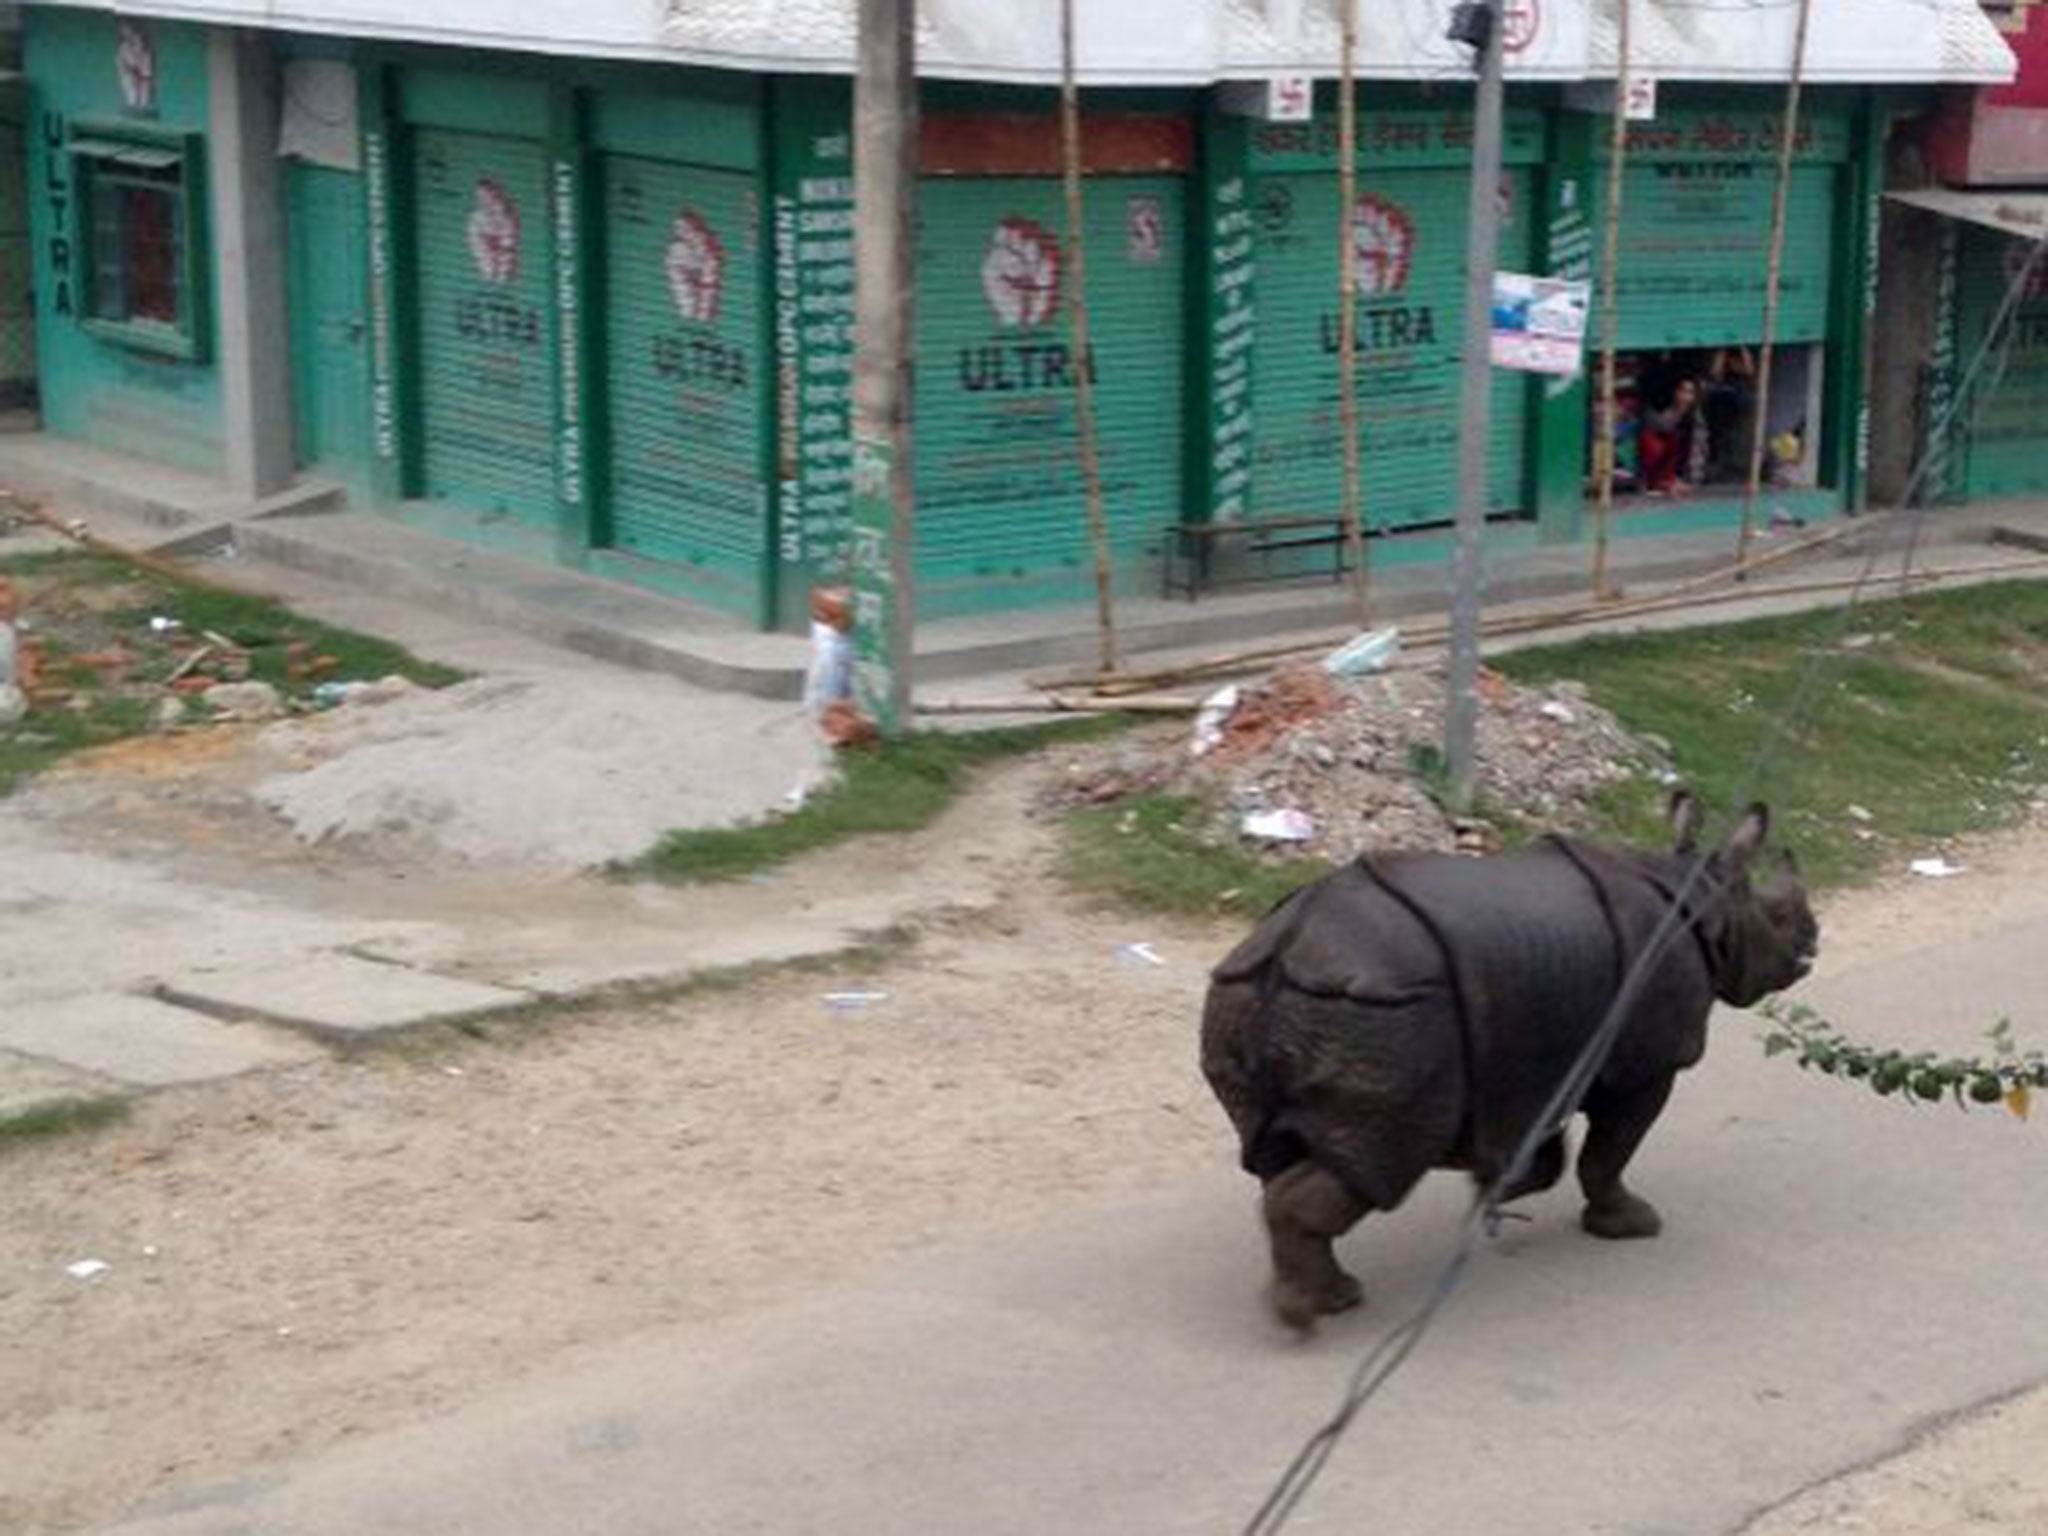 The runaway rhino killed an elderly woman after goring her (AFP/Getty)